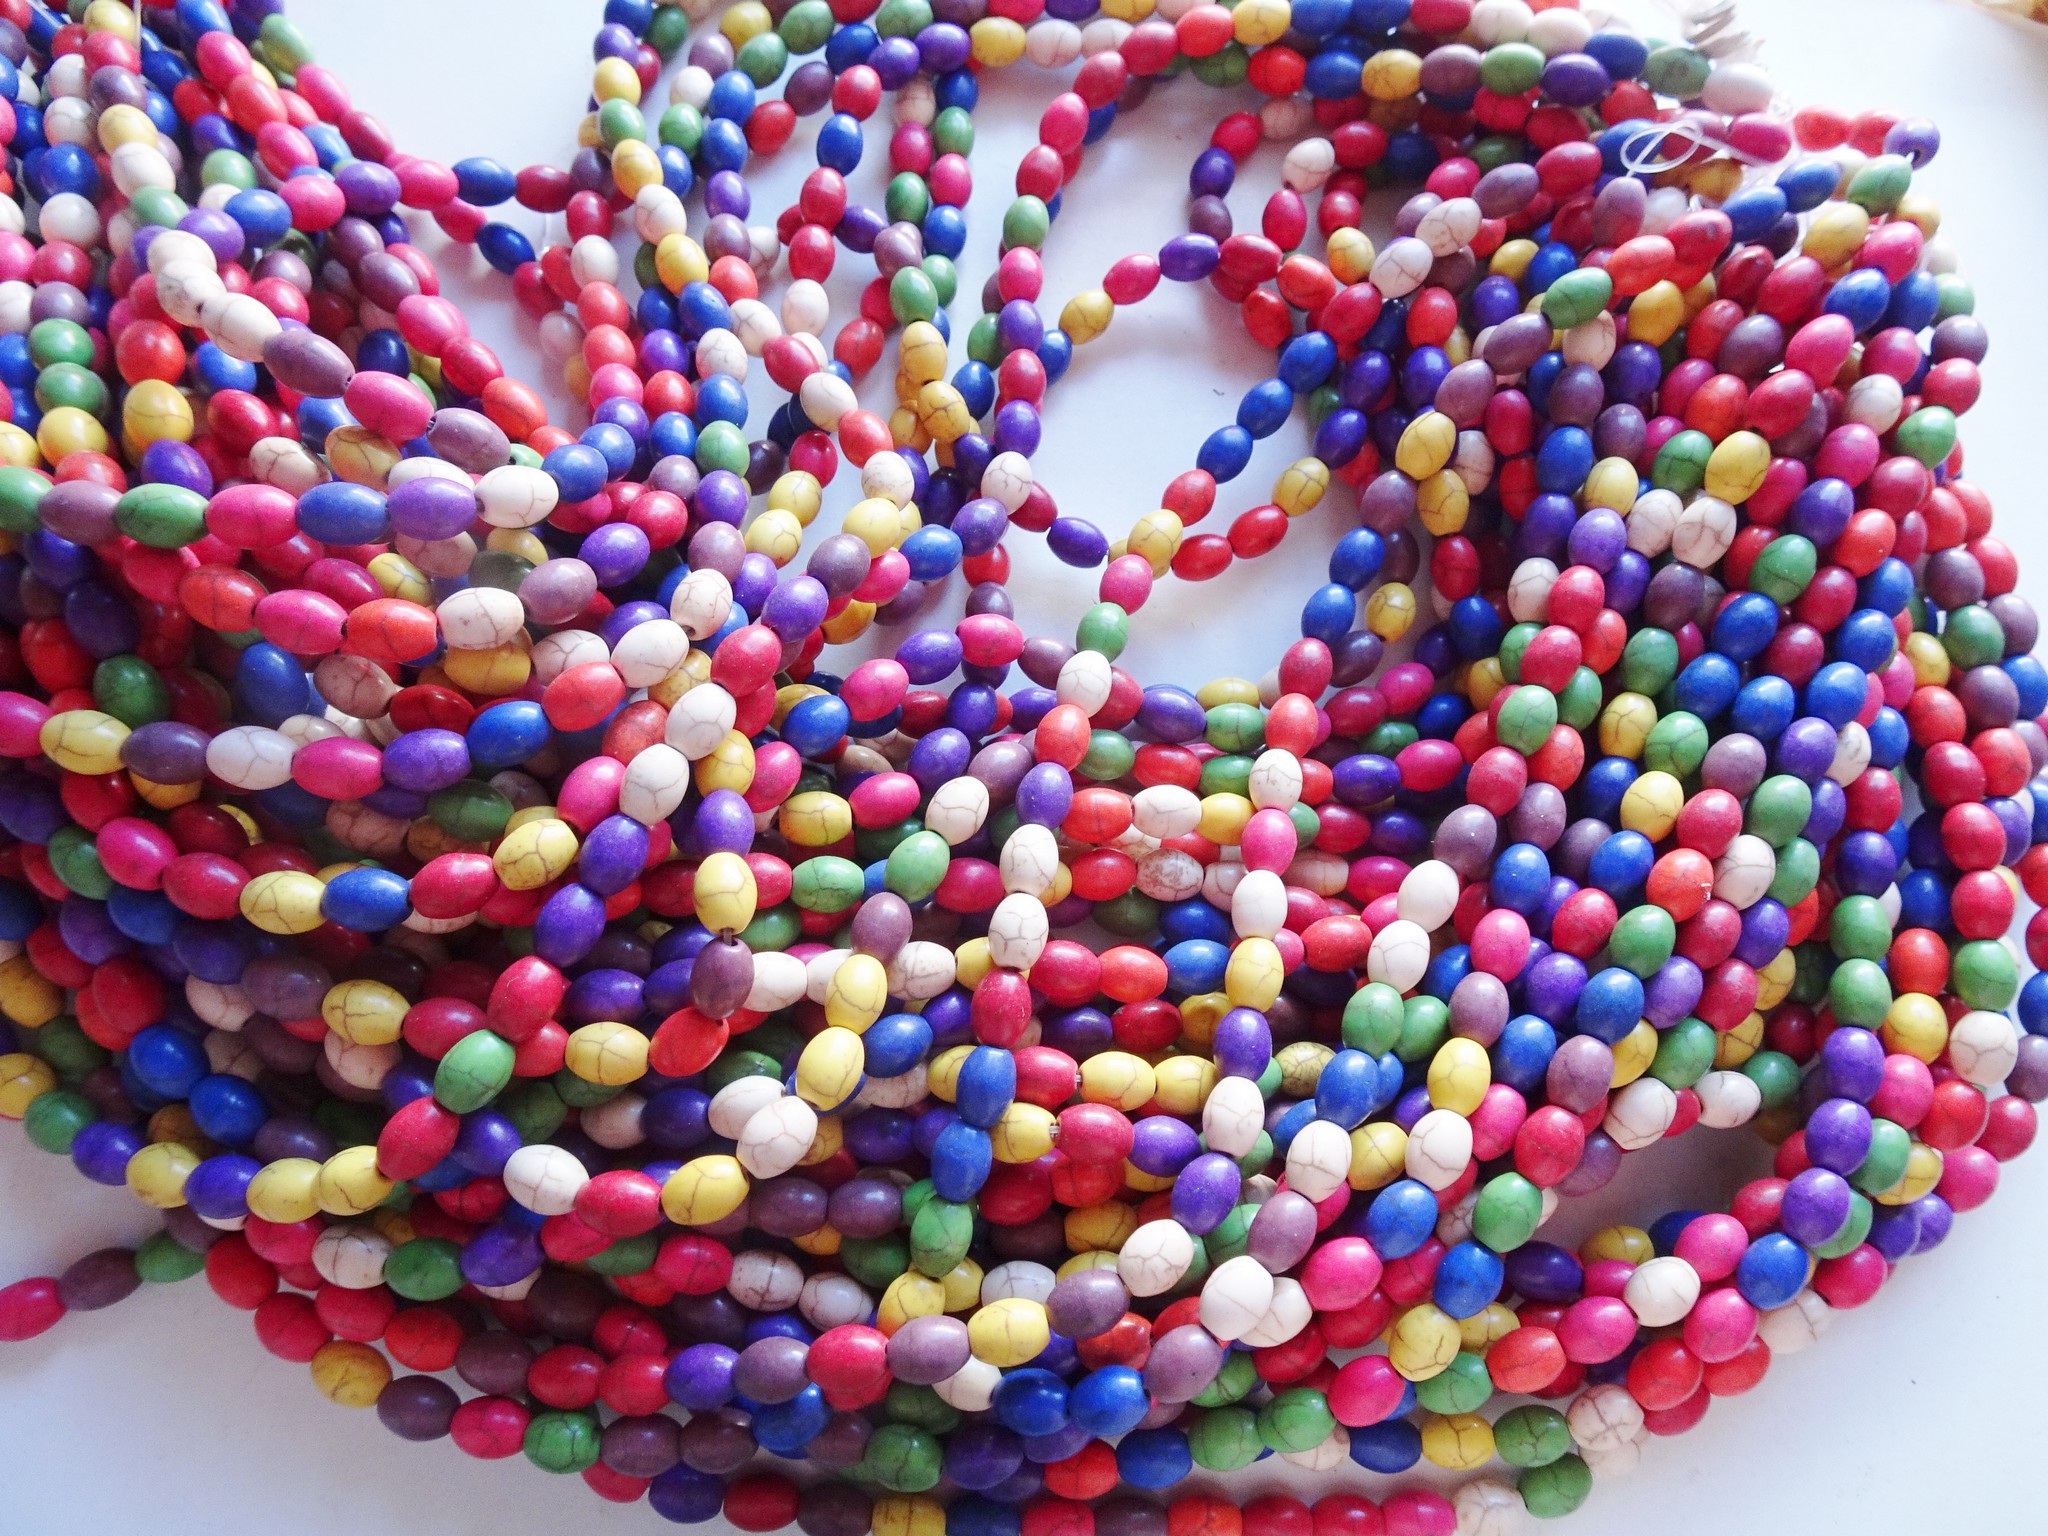 Bead Chain - Multi Muted Colors (Roll) #Silver wire 6mm